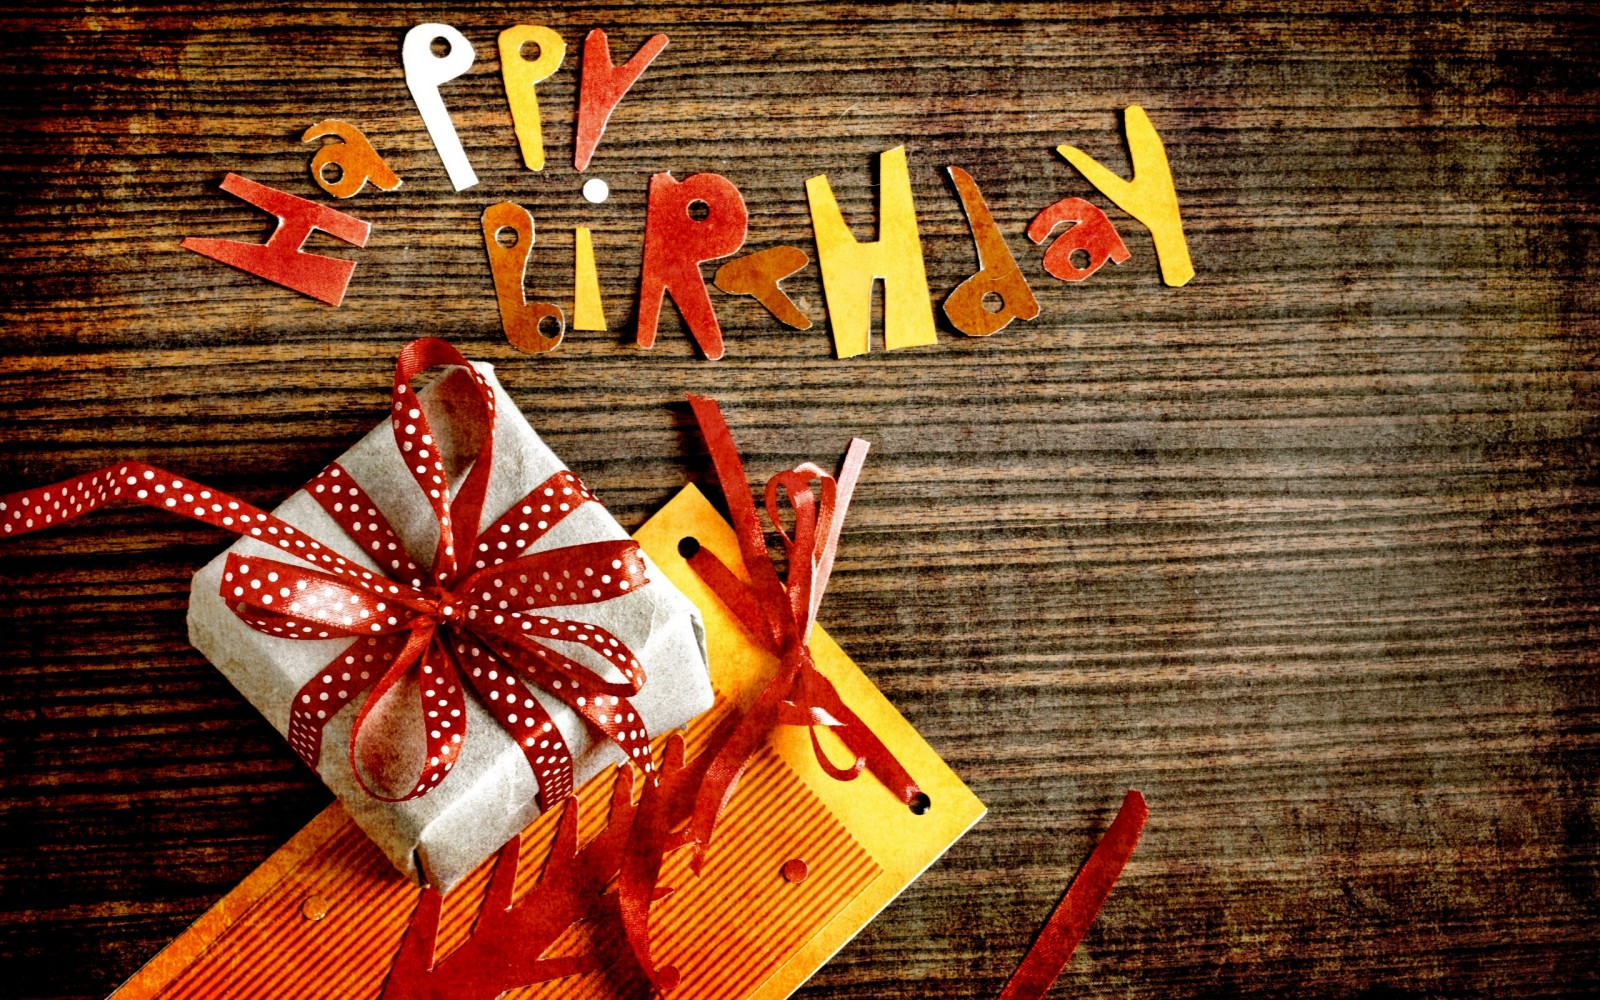 Hilarious Birthday Wishes That Can Make Your Friends Laugh on Their Birthday 2